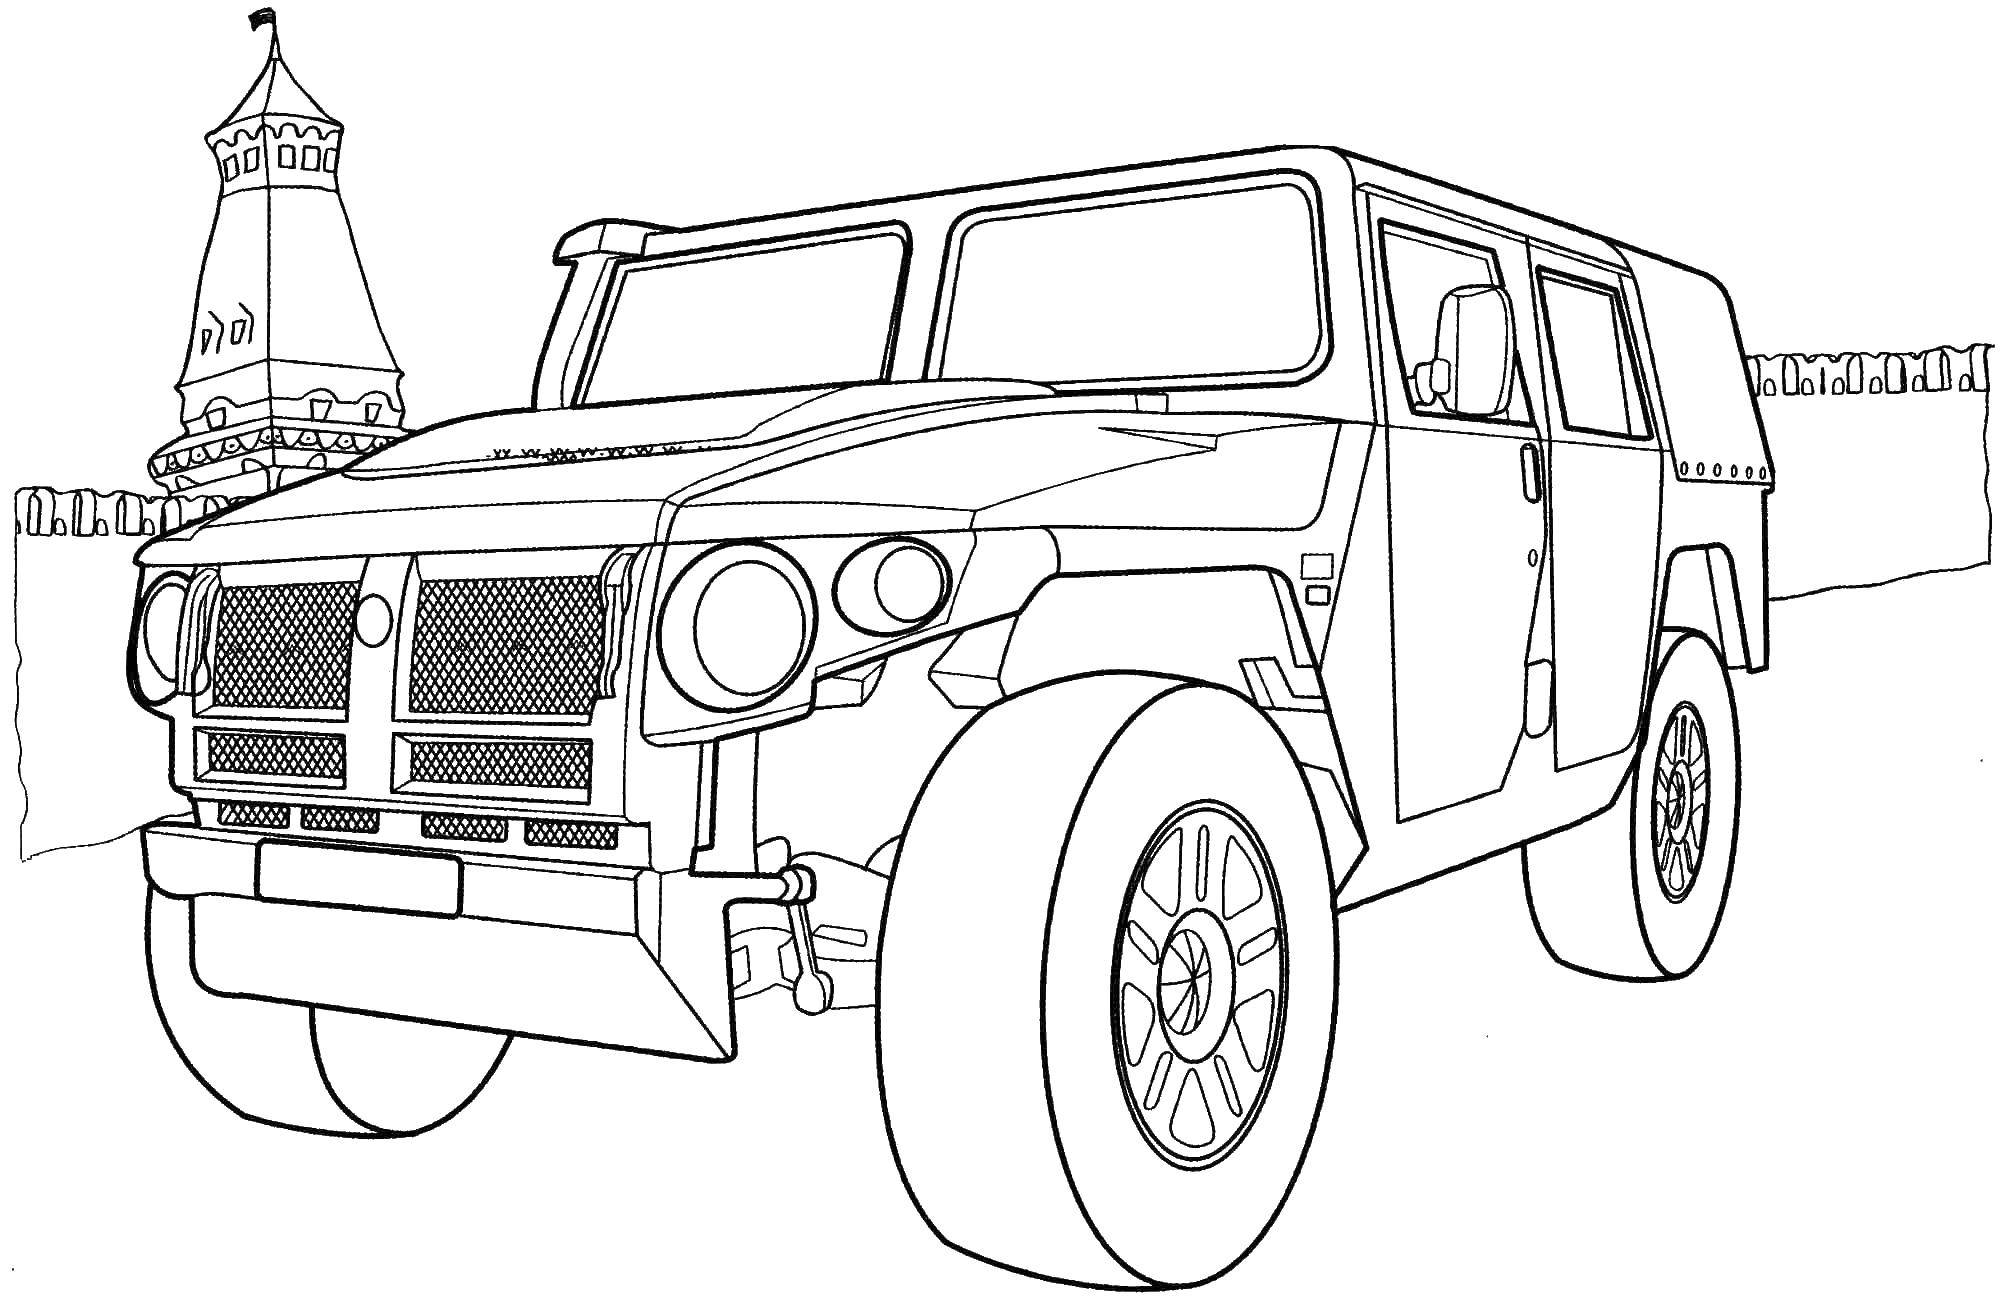 Coloring Jeep. Category machine . Tags:  Jeep, car.